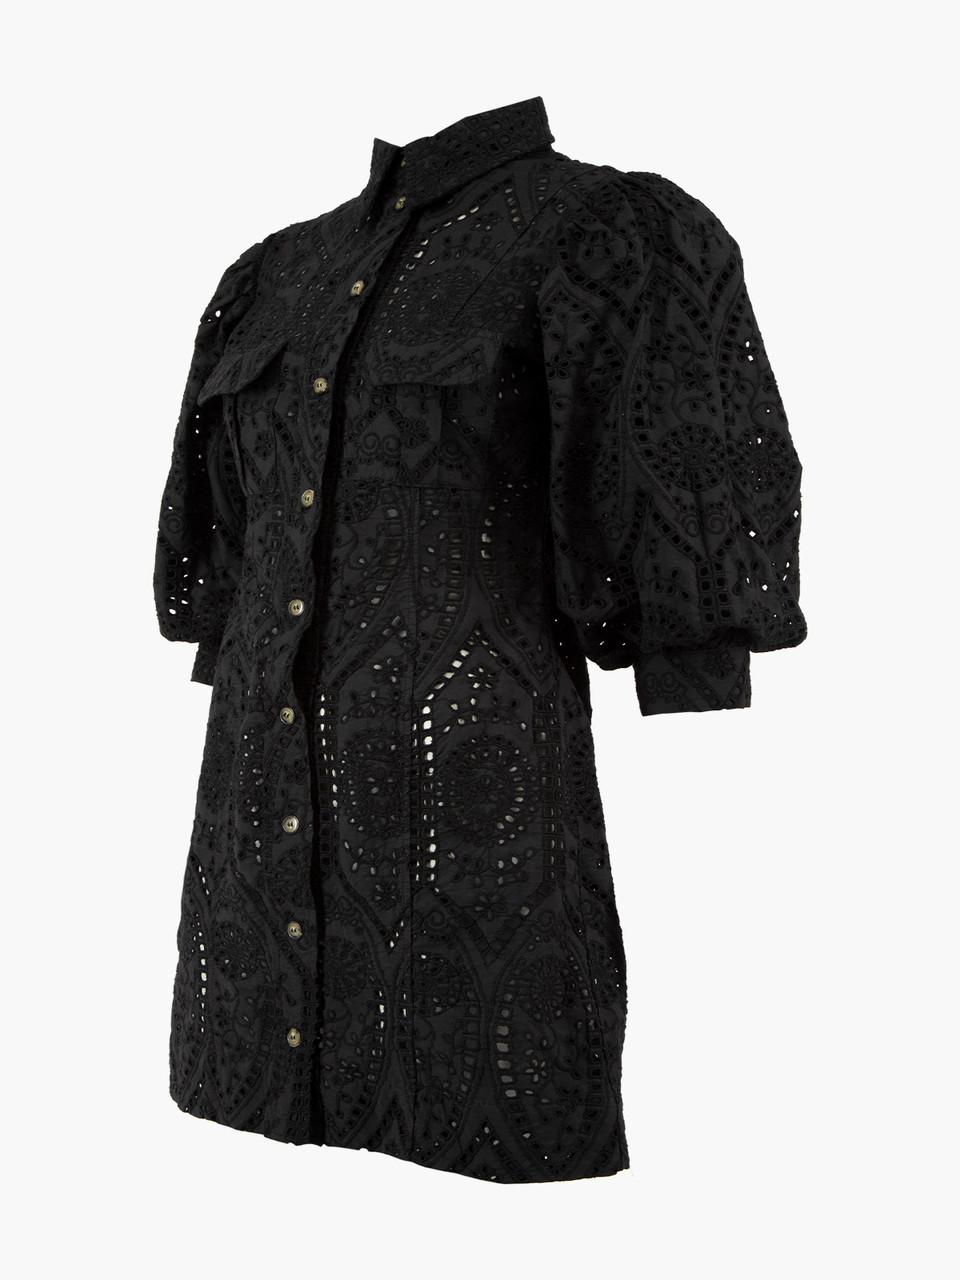 Ganni Women's Black Perforated Embroidered Shirt Dress 1